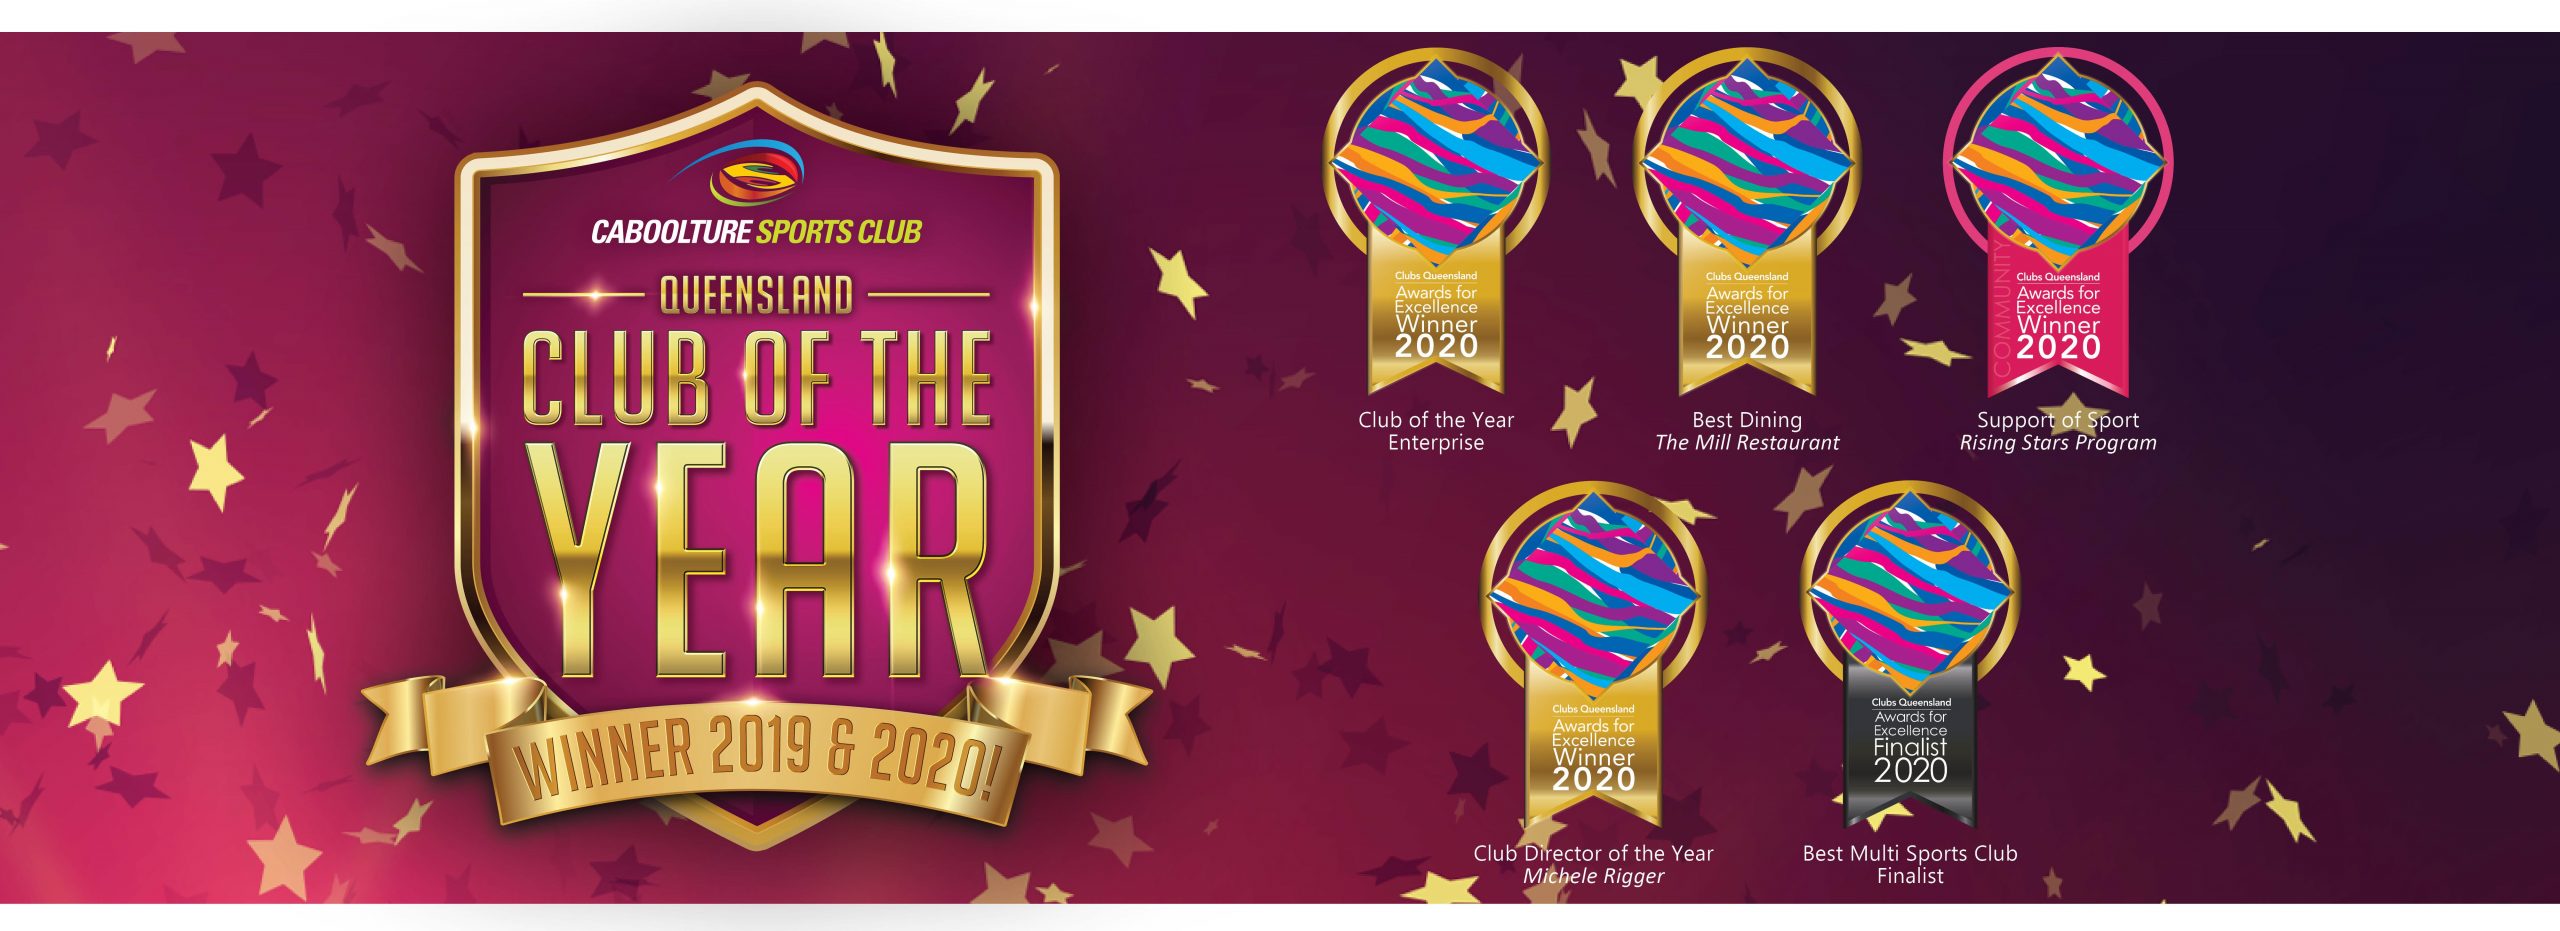 WEB CLUB OF THE YEAR homepage